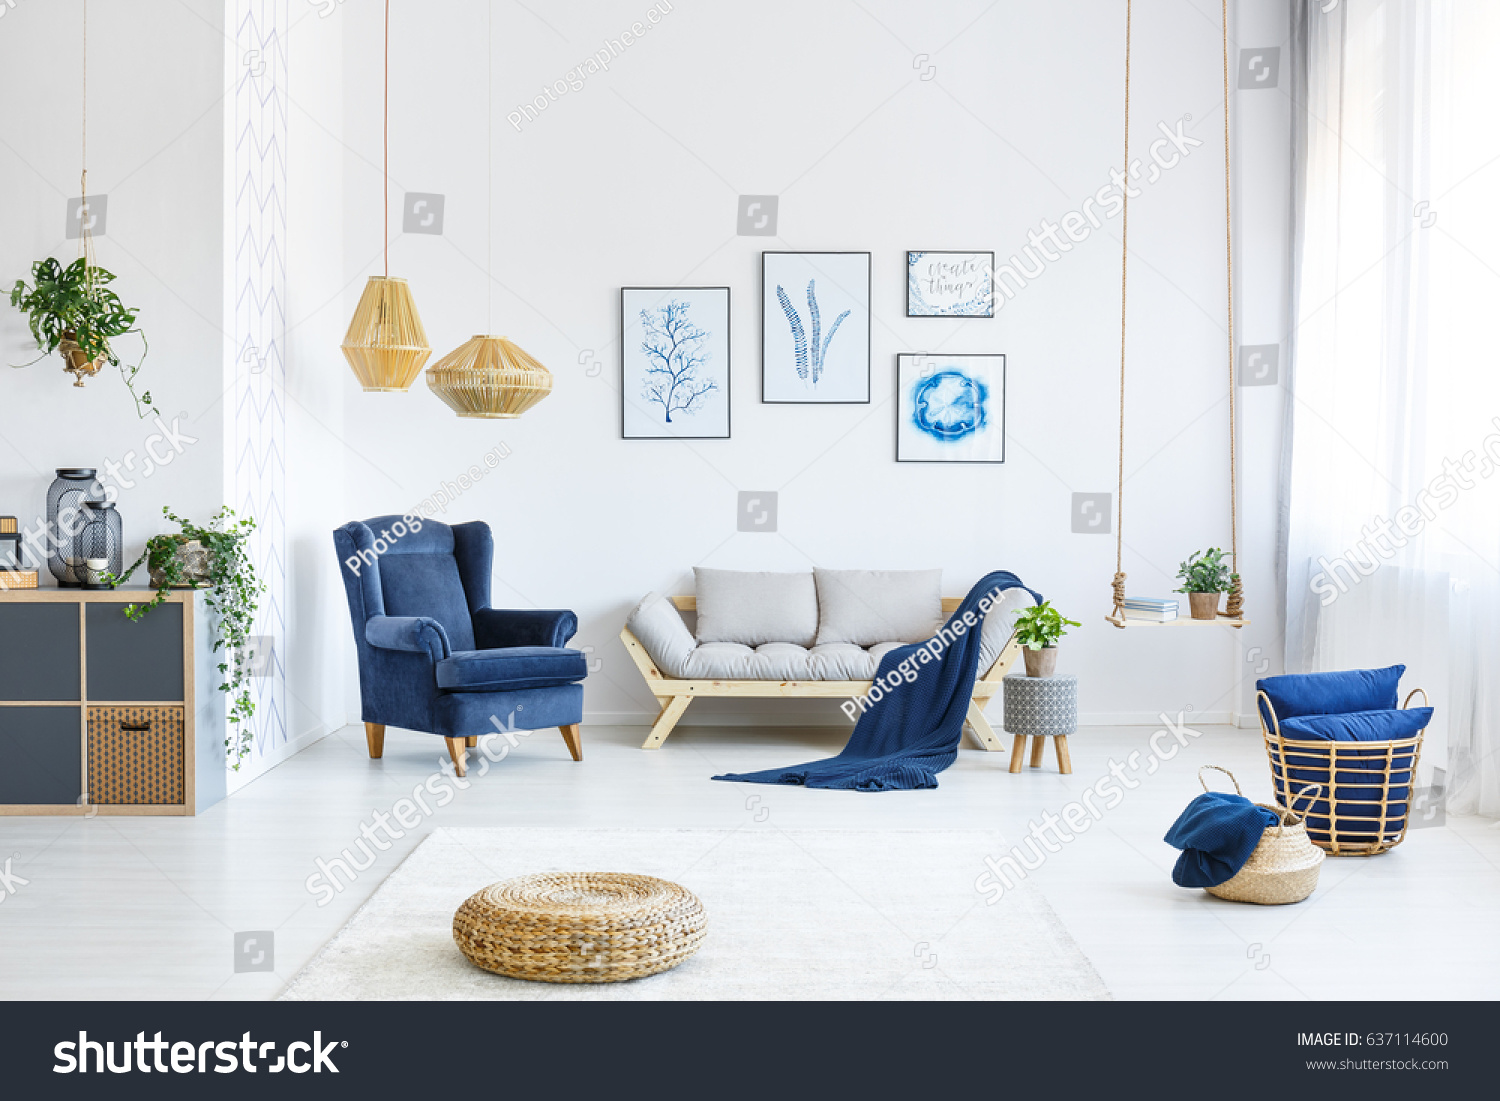 White living room with wood sofa, blue armchair, lamps, posters #637114600